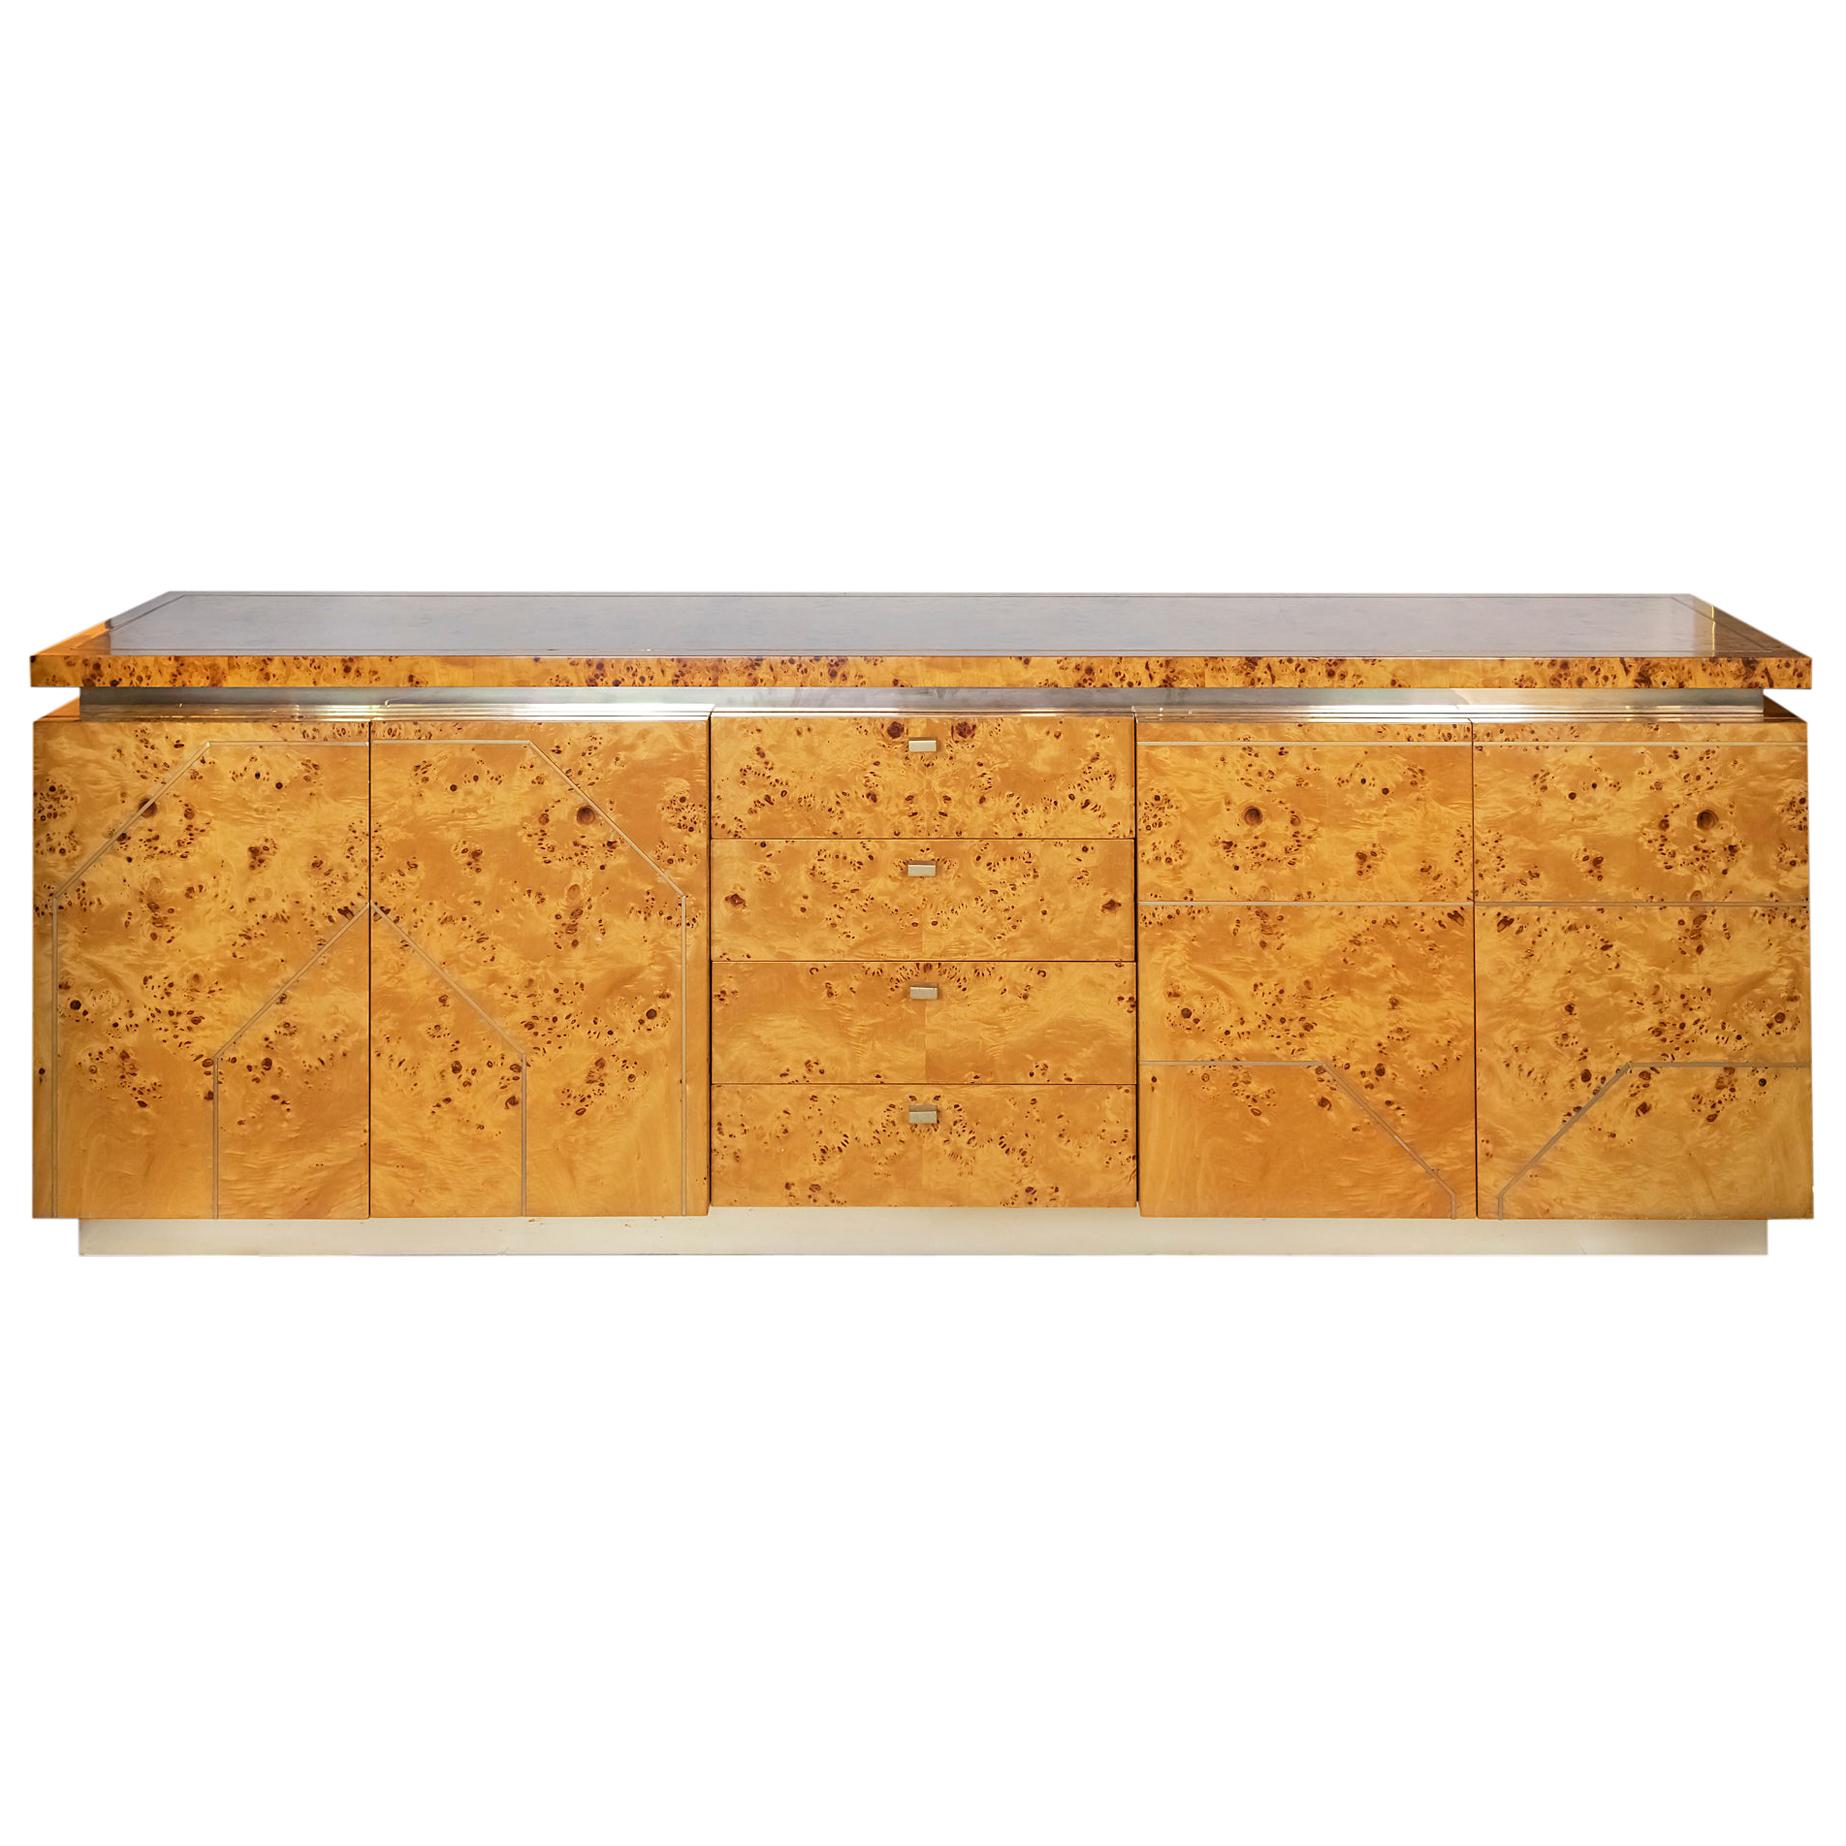 Midcentury Italian Sideboard / Commode by Willy Rizzo